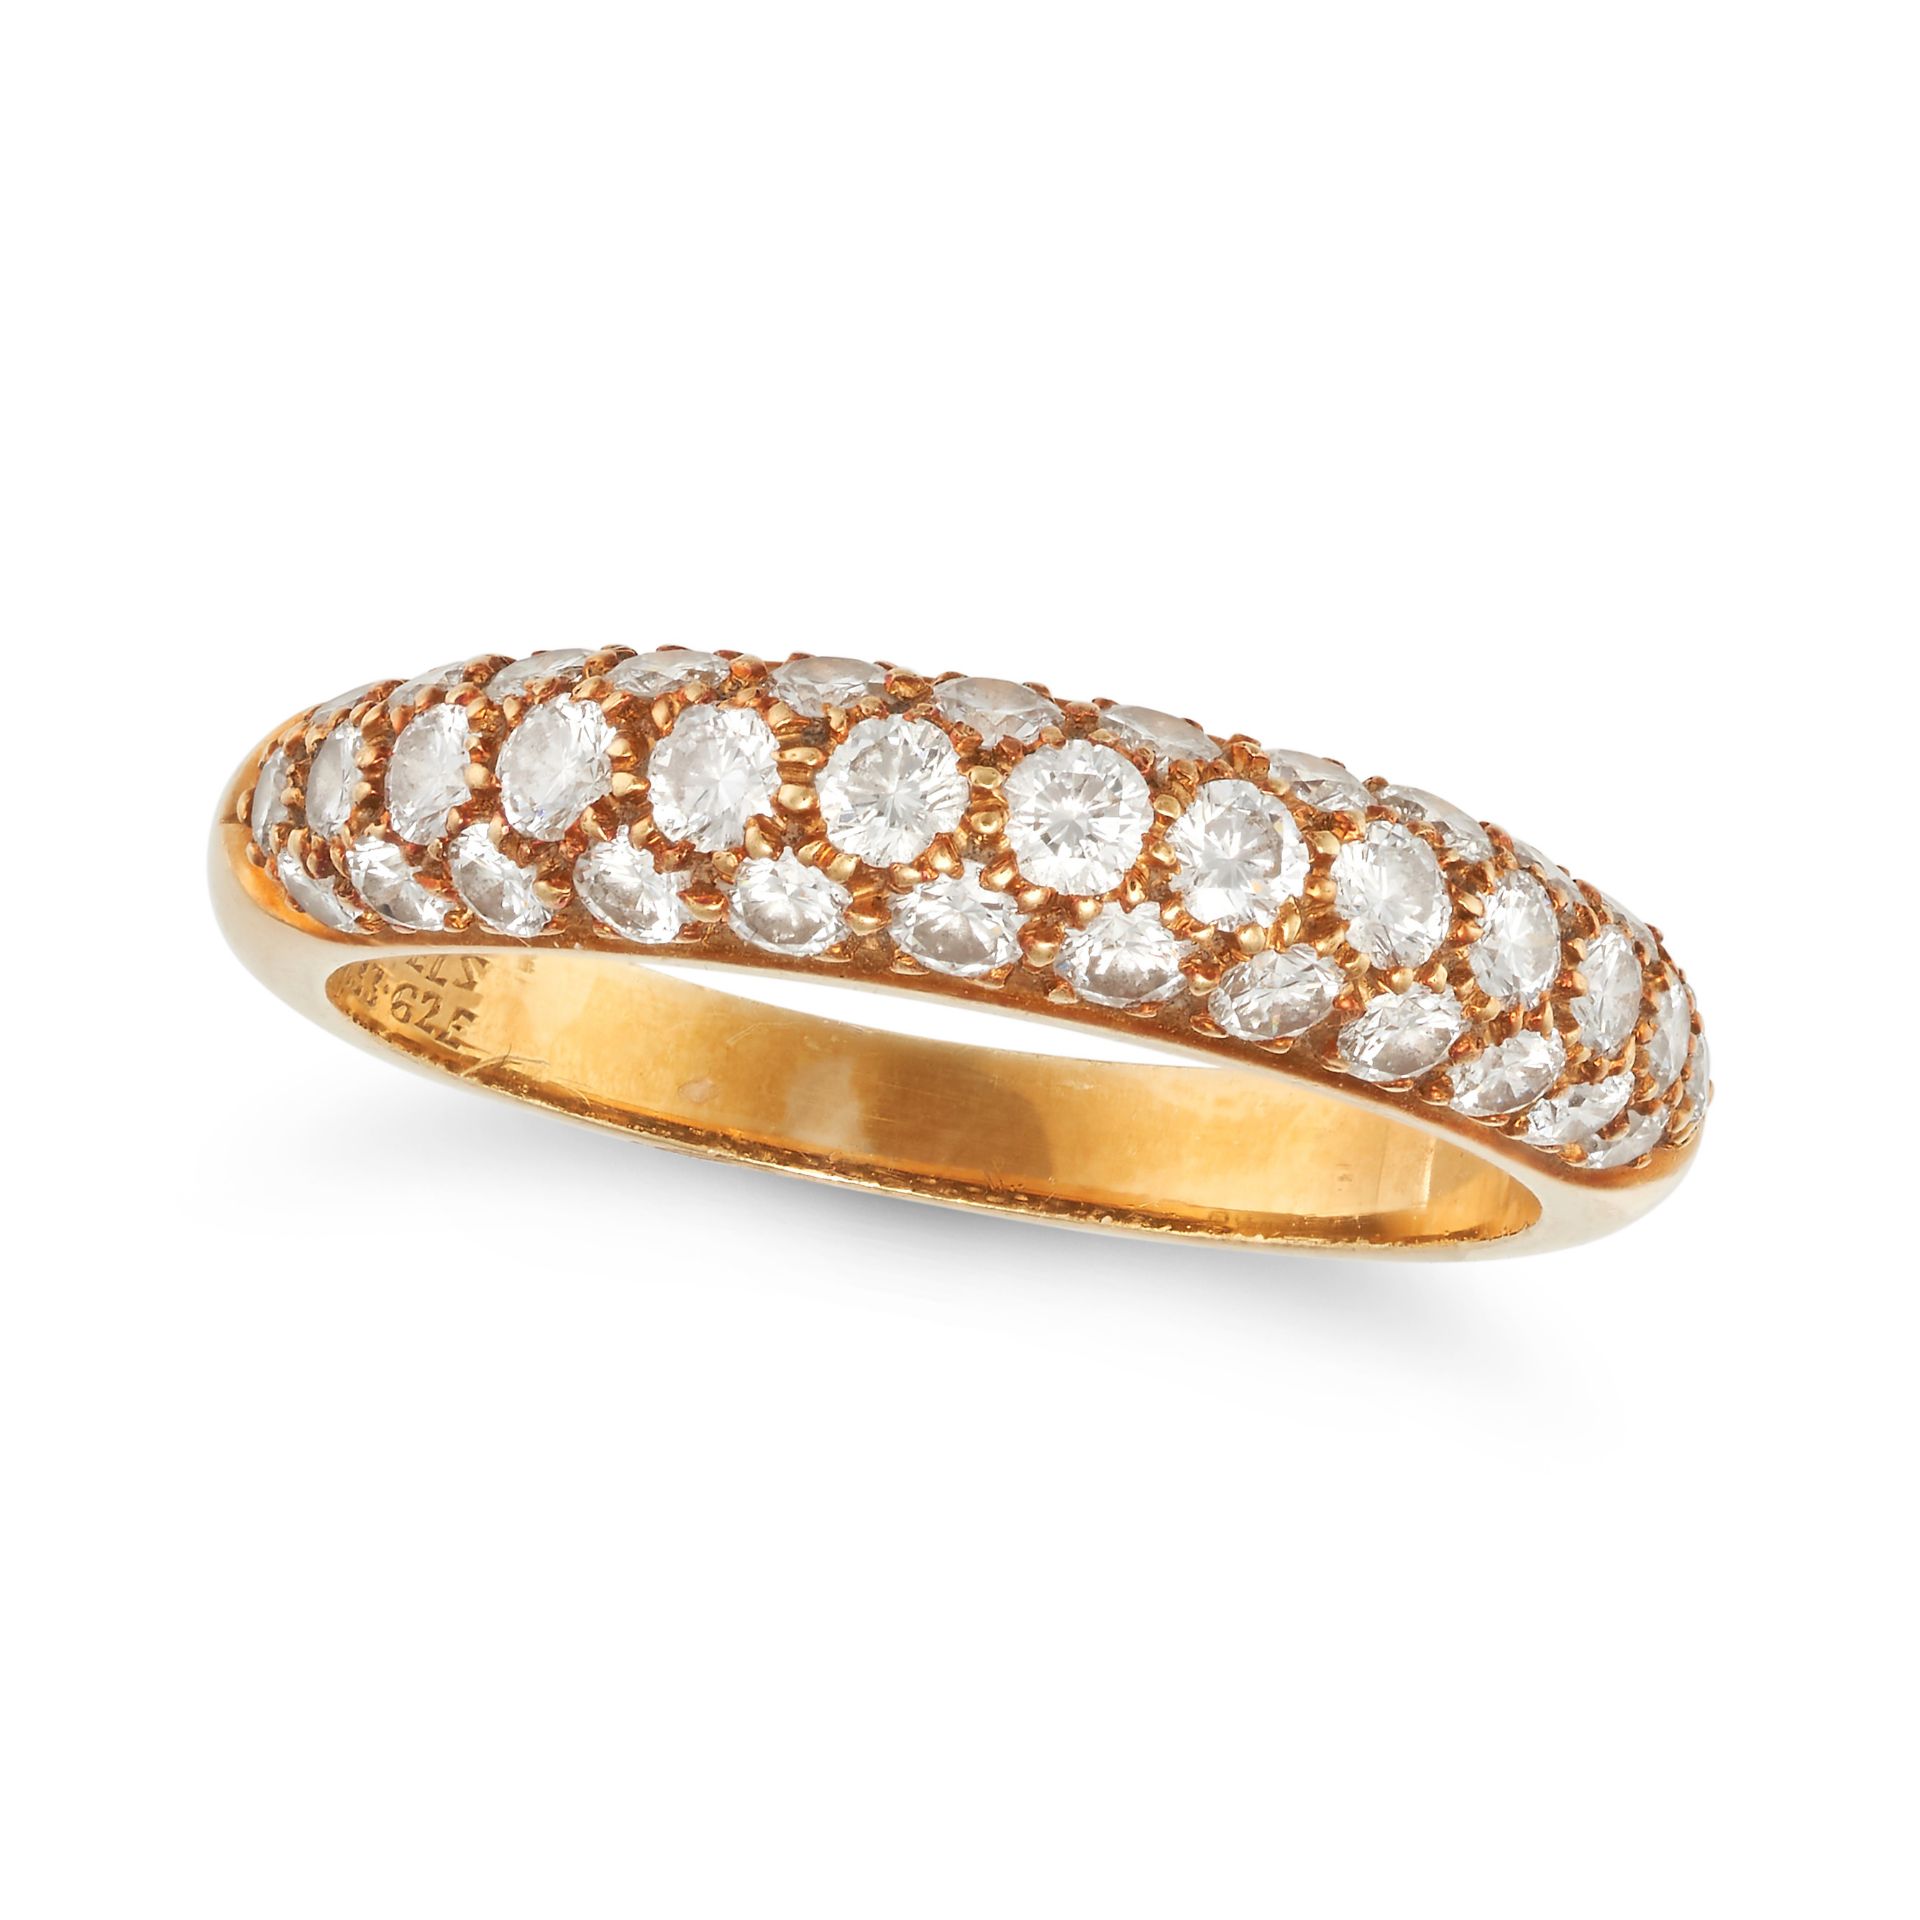 VAN CLEEF & ARPELS, A DIAMOND BOMBE RING in 18ct yellow gold, pave set with round brilliant cut d...